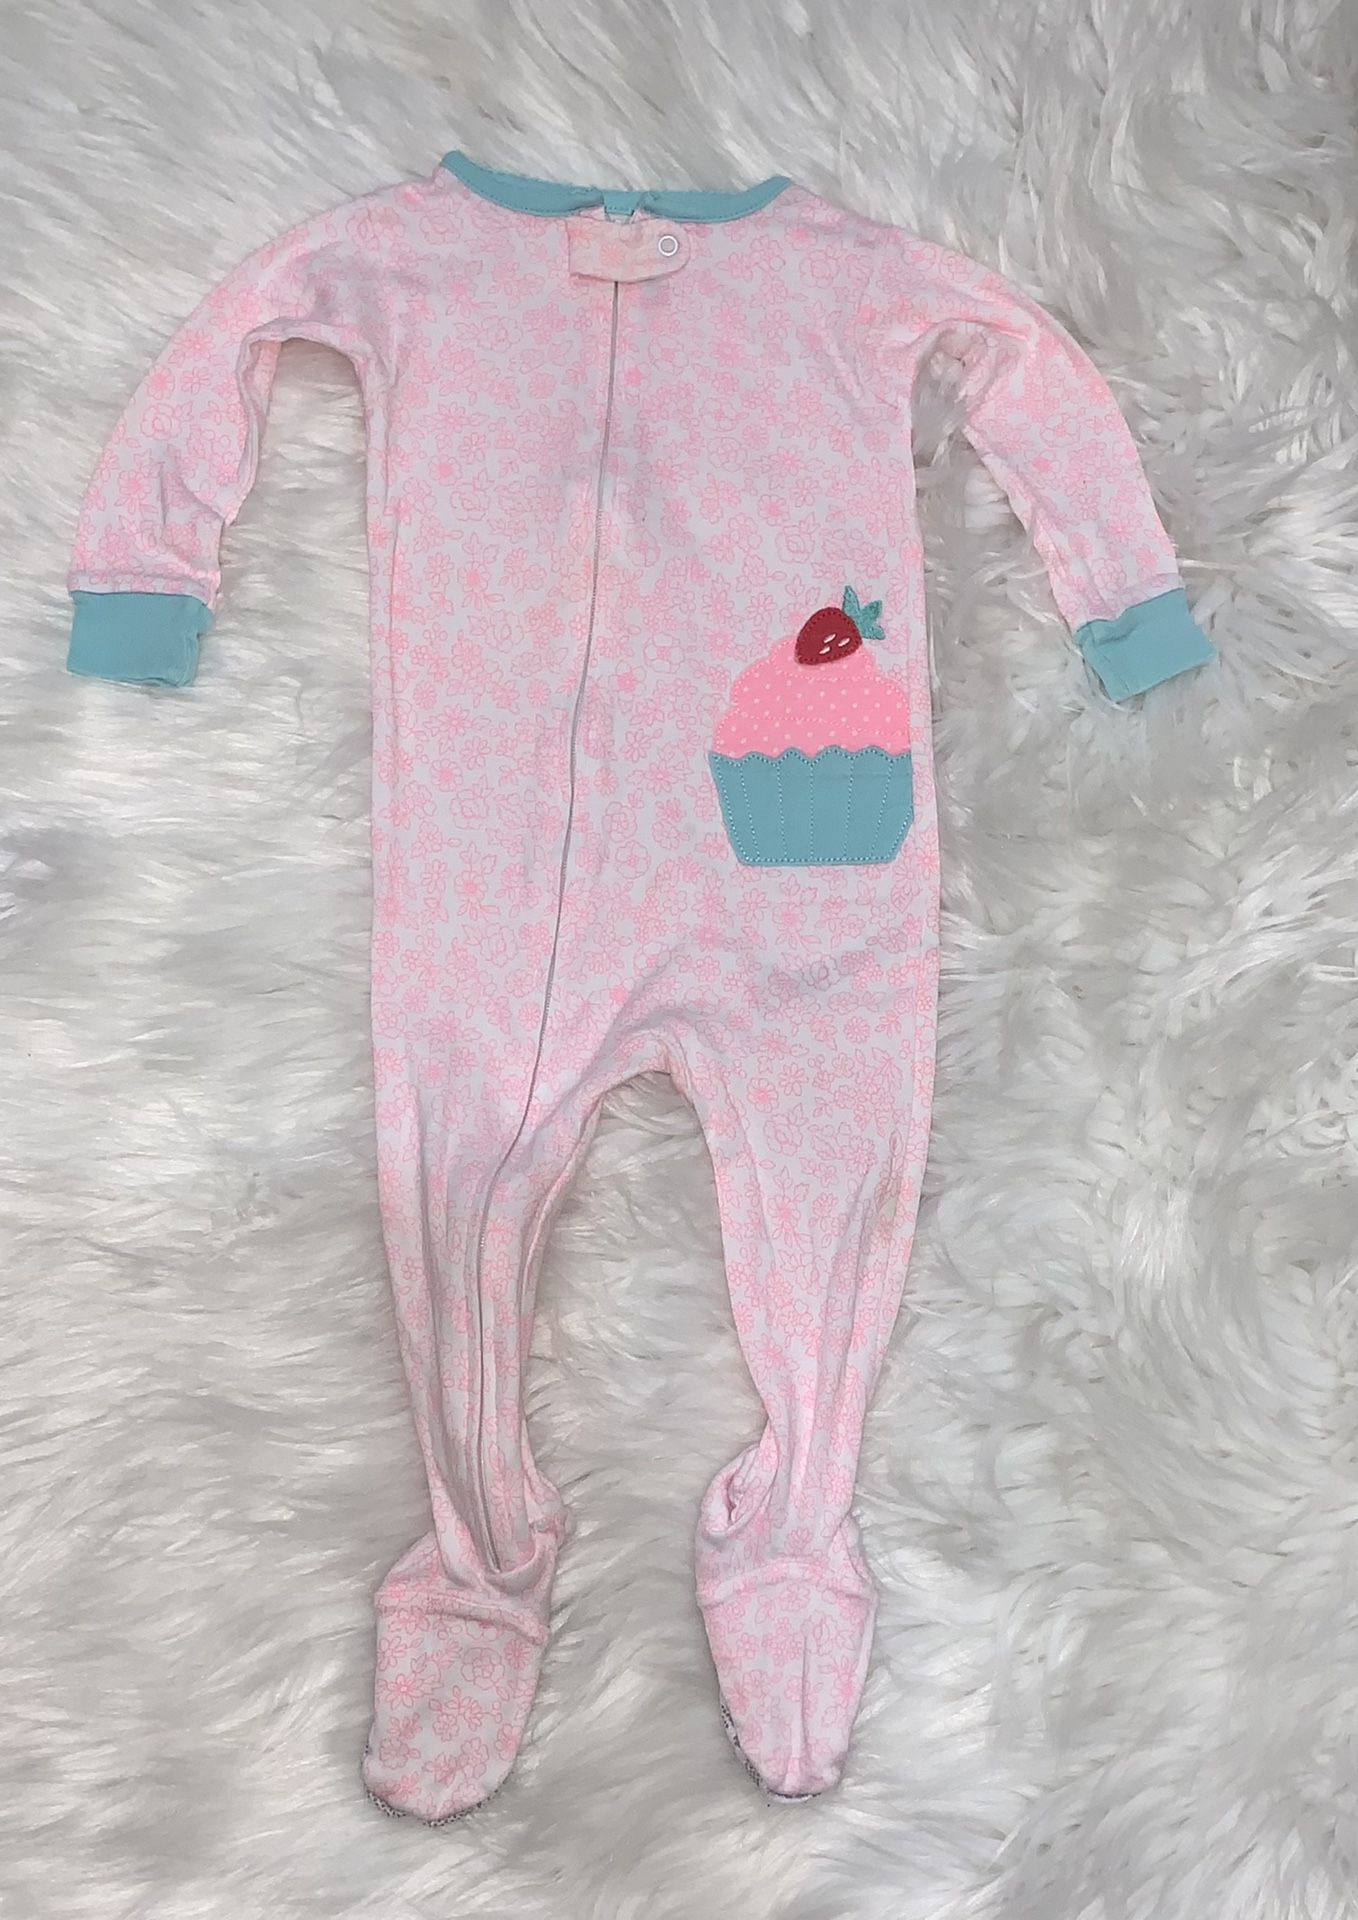 Baby footed pjs